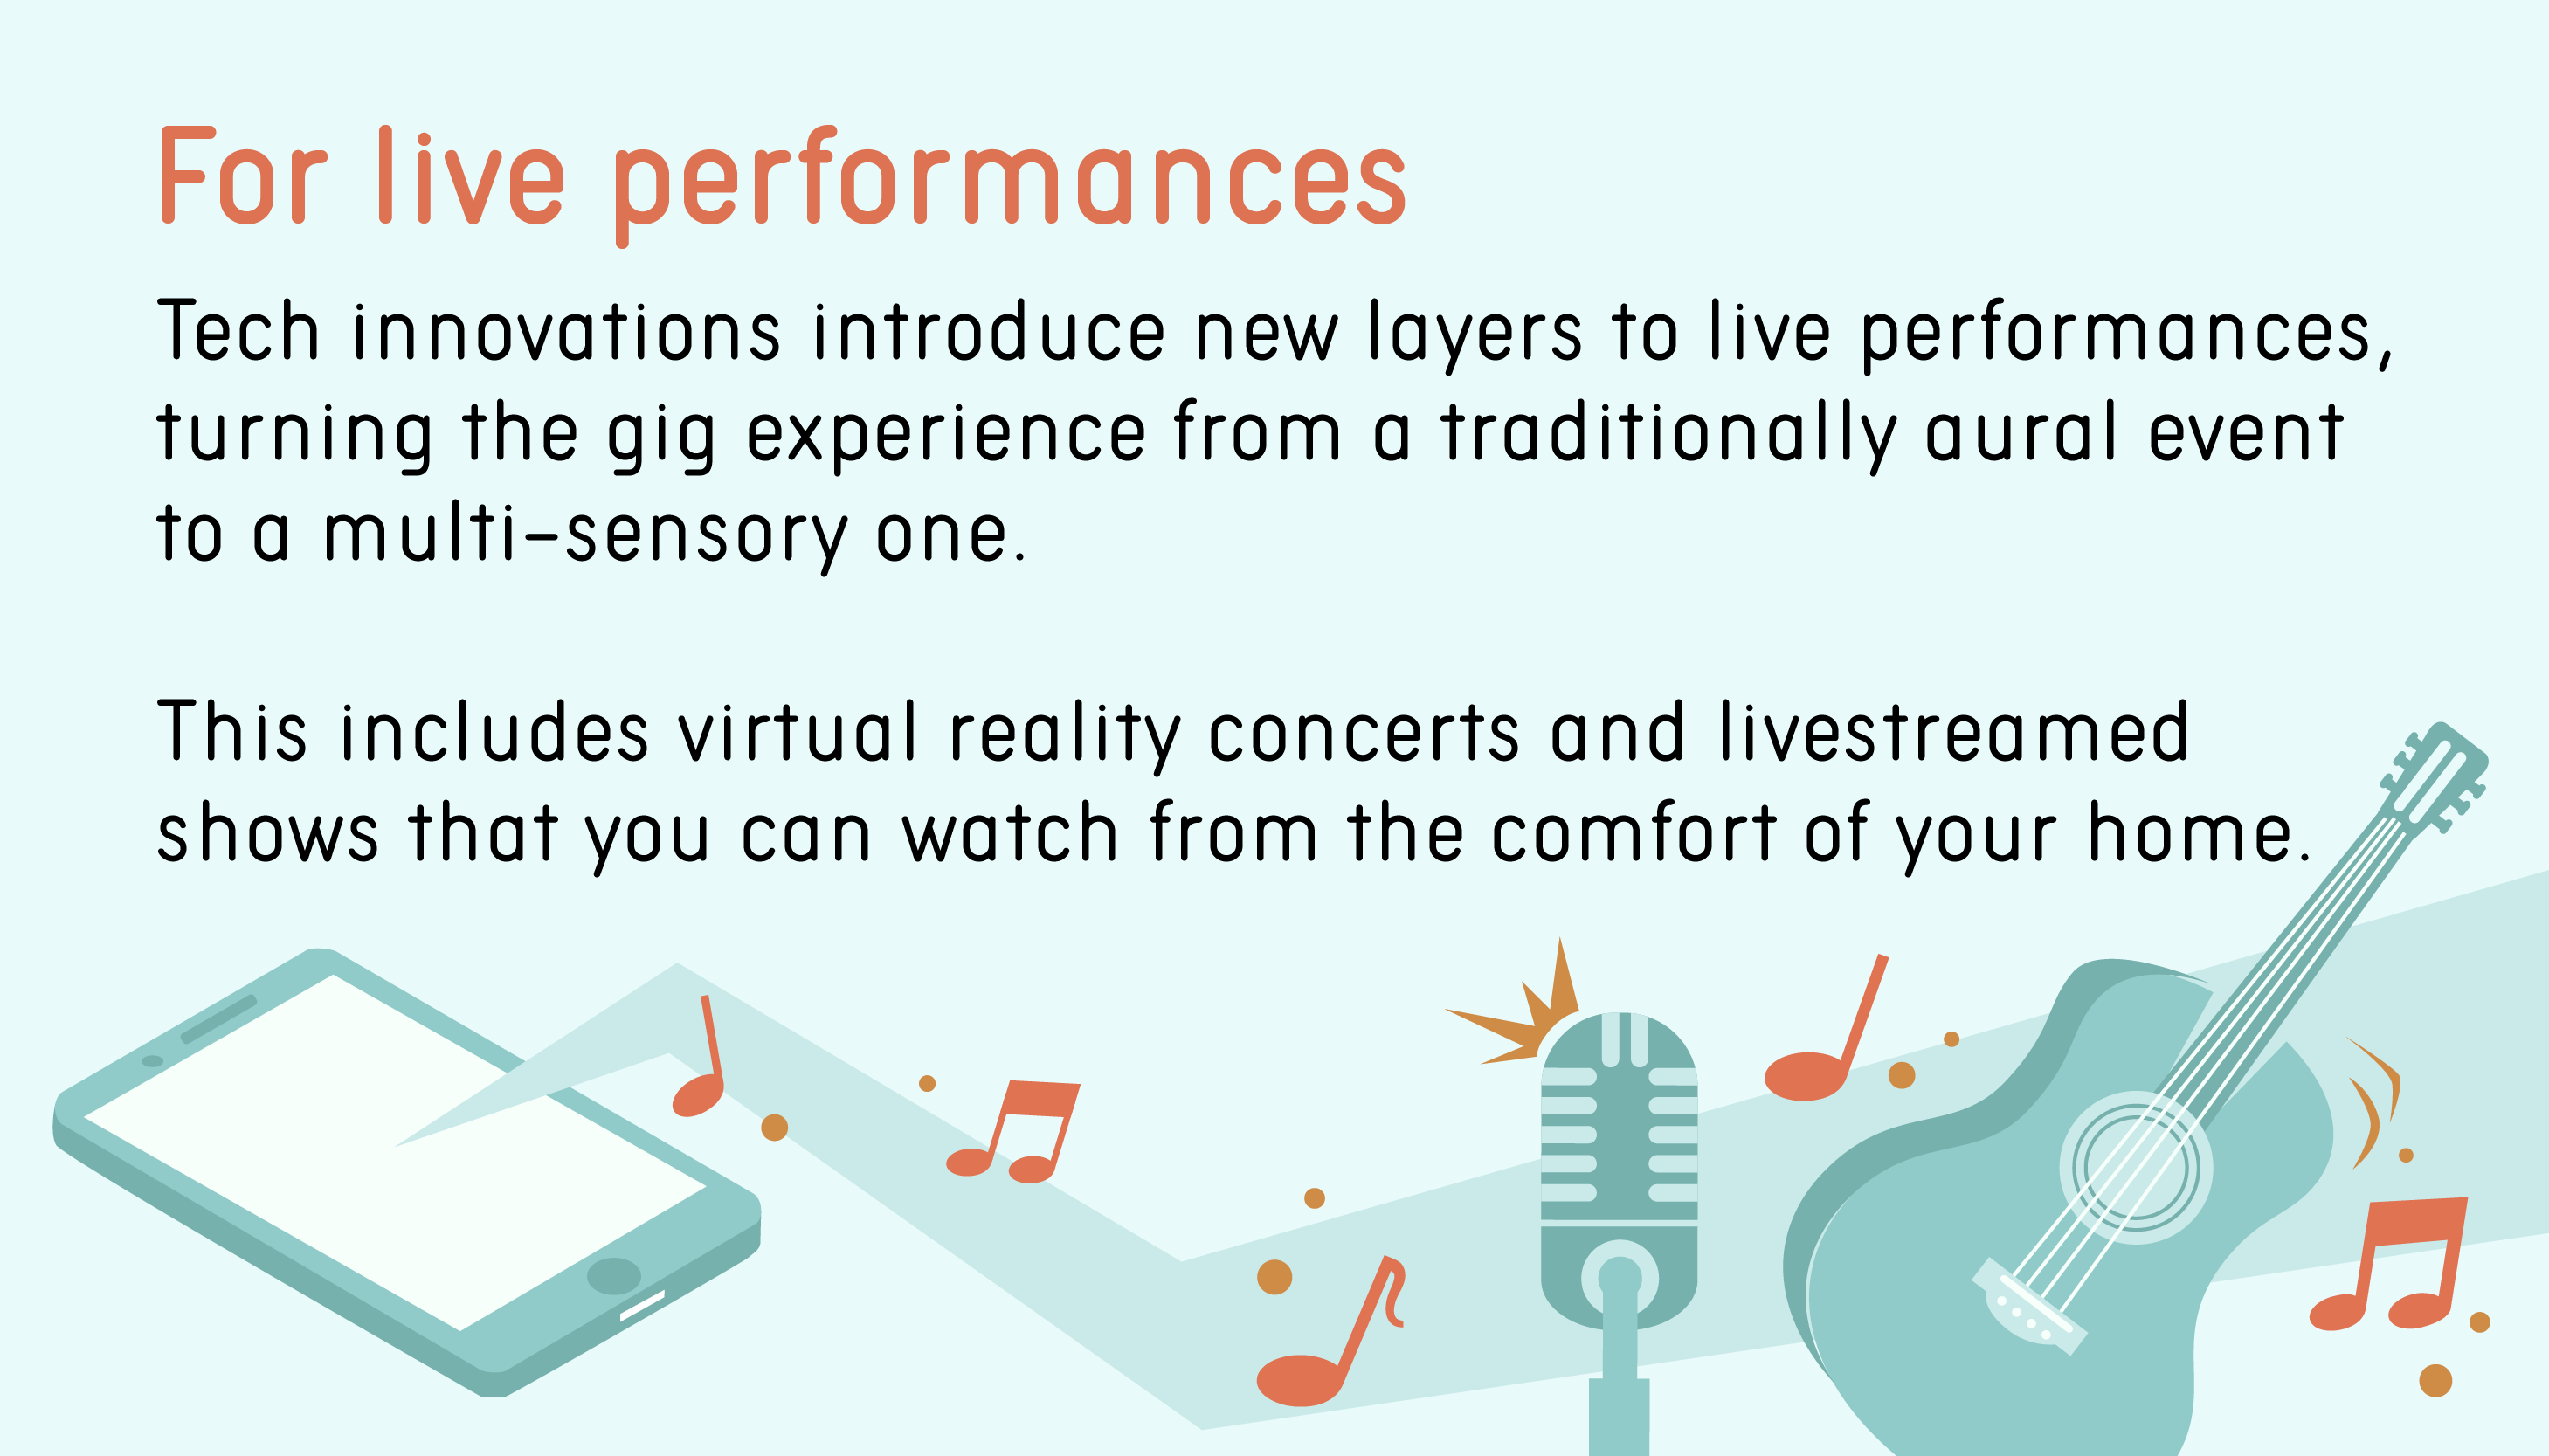 For live performances: Tech innovations introduce new layers to live performances, turning the gig experience from a traditionally aural event to a multi-sensory one. This includes virtual reality concerts and livestreamed shows that you can watch from the comfort of your home.